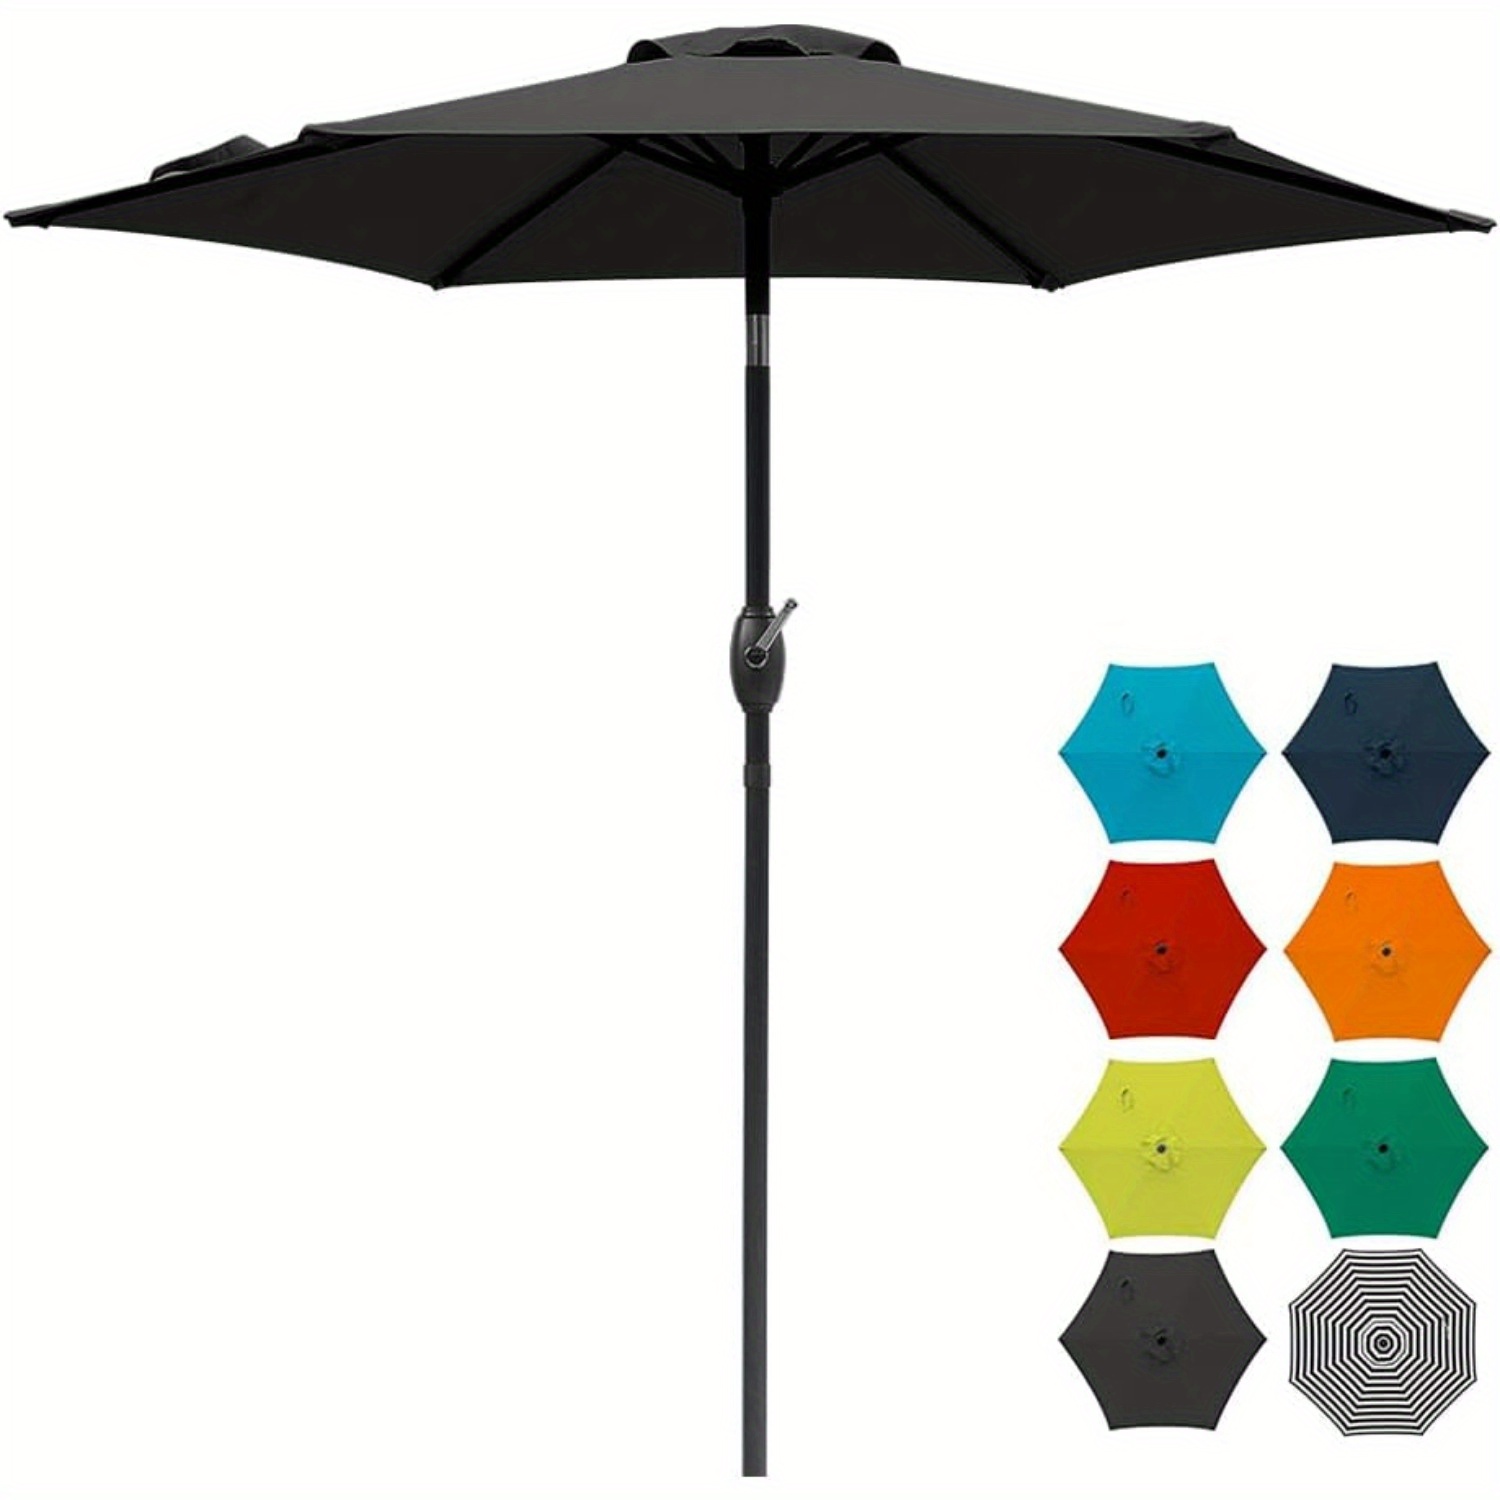 

Royalcraft 7.5ft Luxury Outdoor Patio Umbrella With Aluminum Pole And Push Button Tilt, Perfect For Restaurant Patio Or Outdoor Garden Furniture Sets